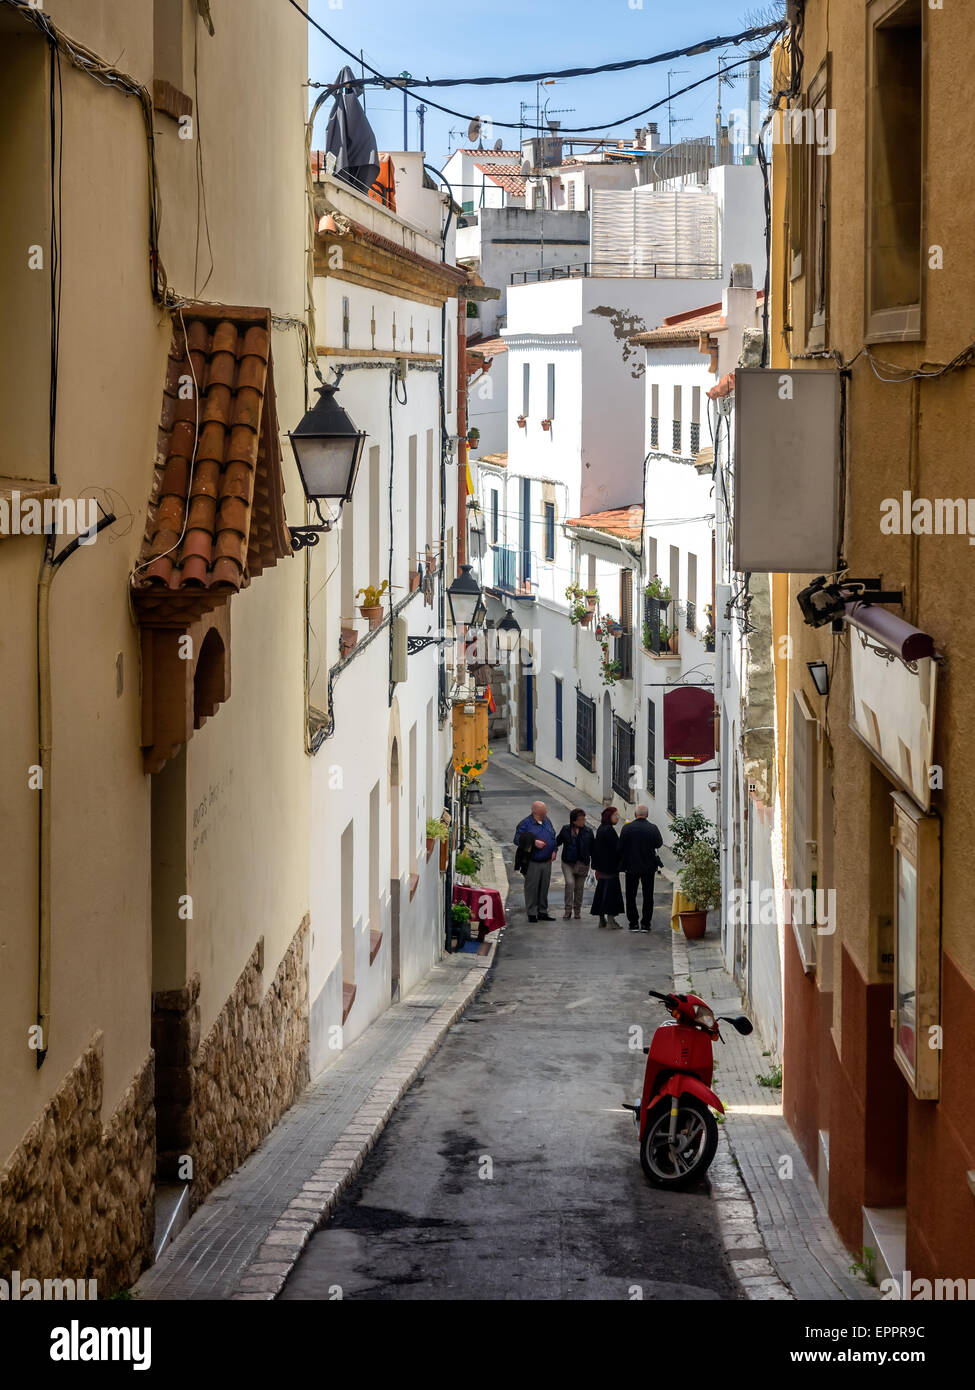 Narrow medieval street in Old Sitges, historical resort-city close to Barcelona in Spain Stock Photo